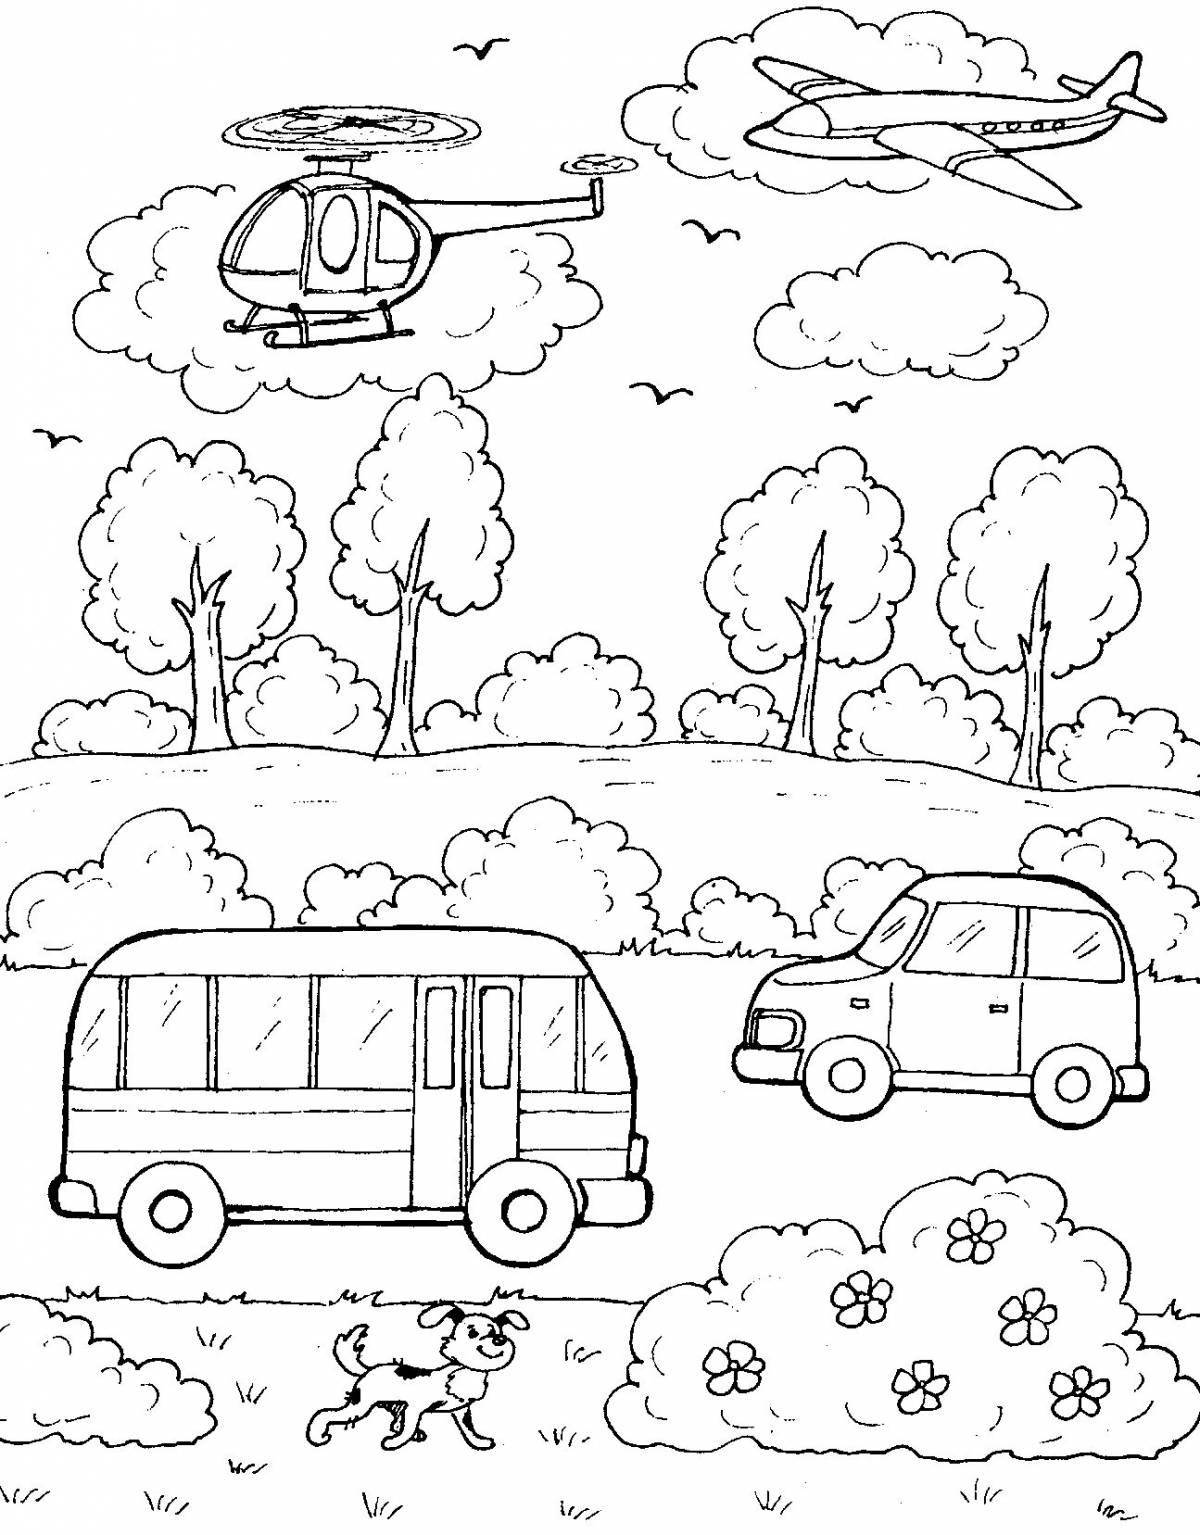 Countryballs coloring page